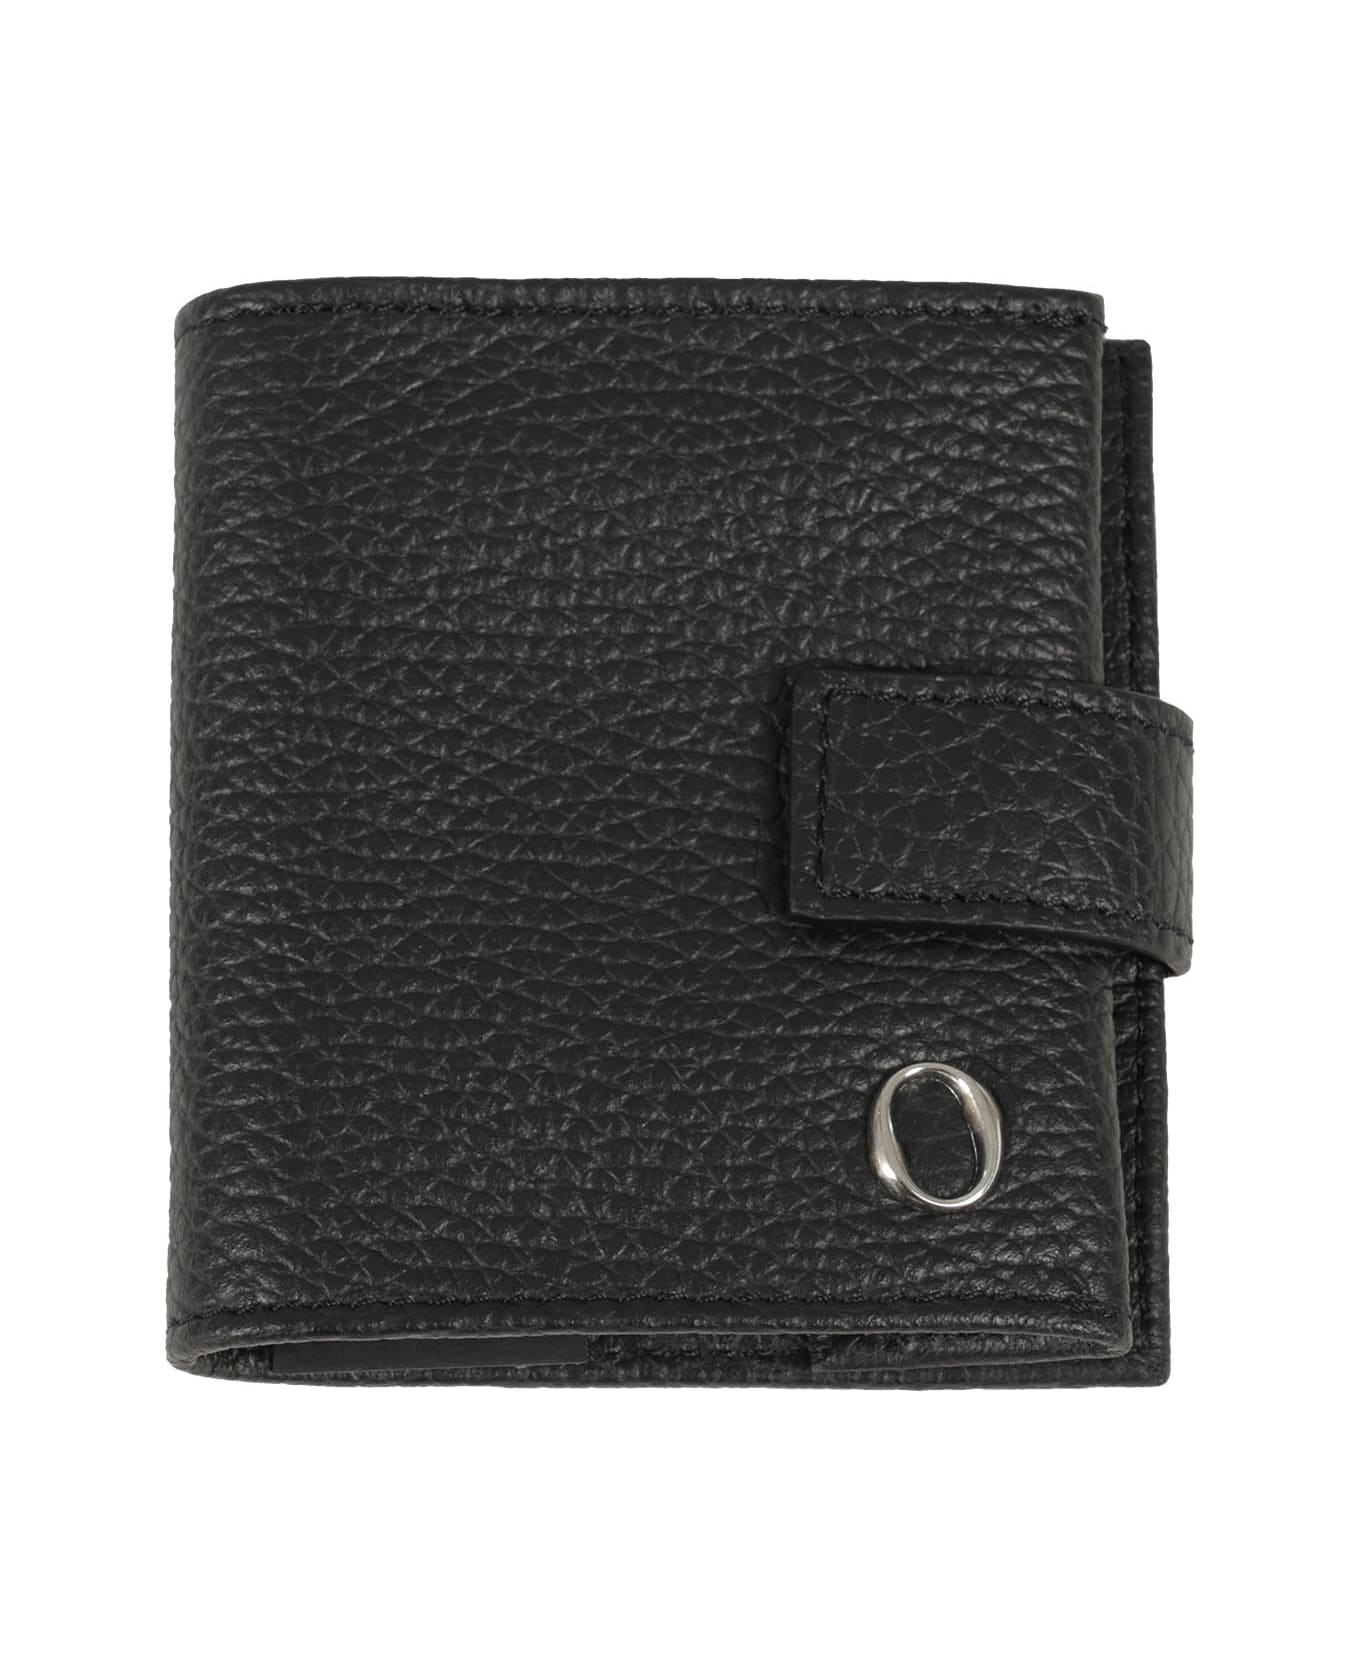 Orciani Leather Wallet - Ner Nero